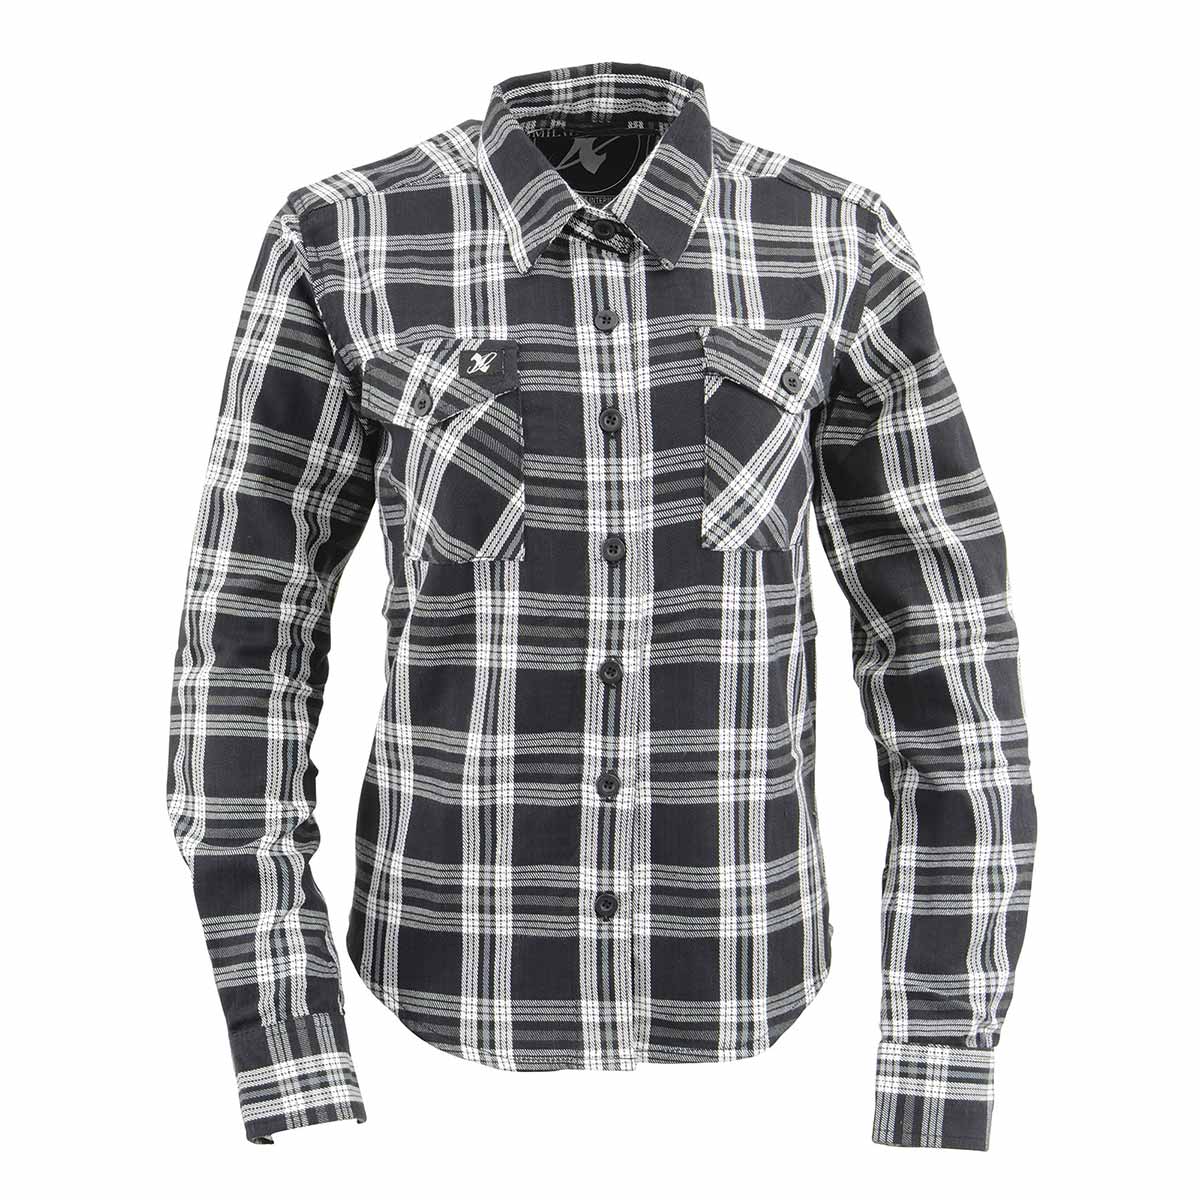 NexGen MNG21600 Women's Casual Black and White Long Sleeve Cotton Flannel Shirt